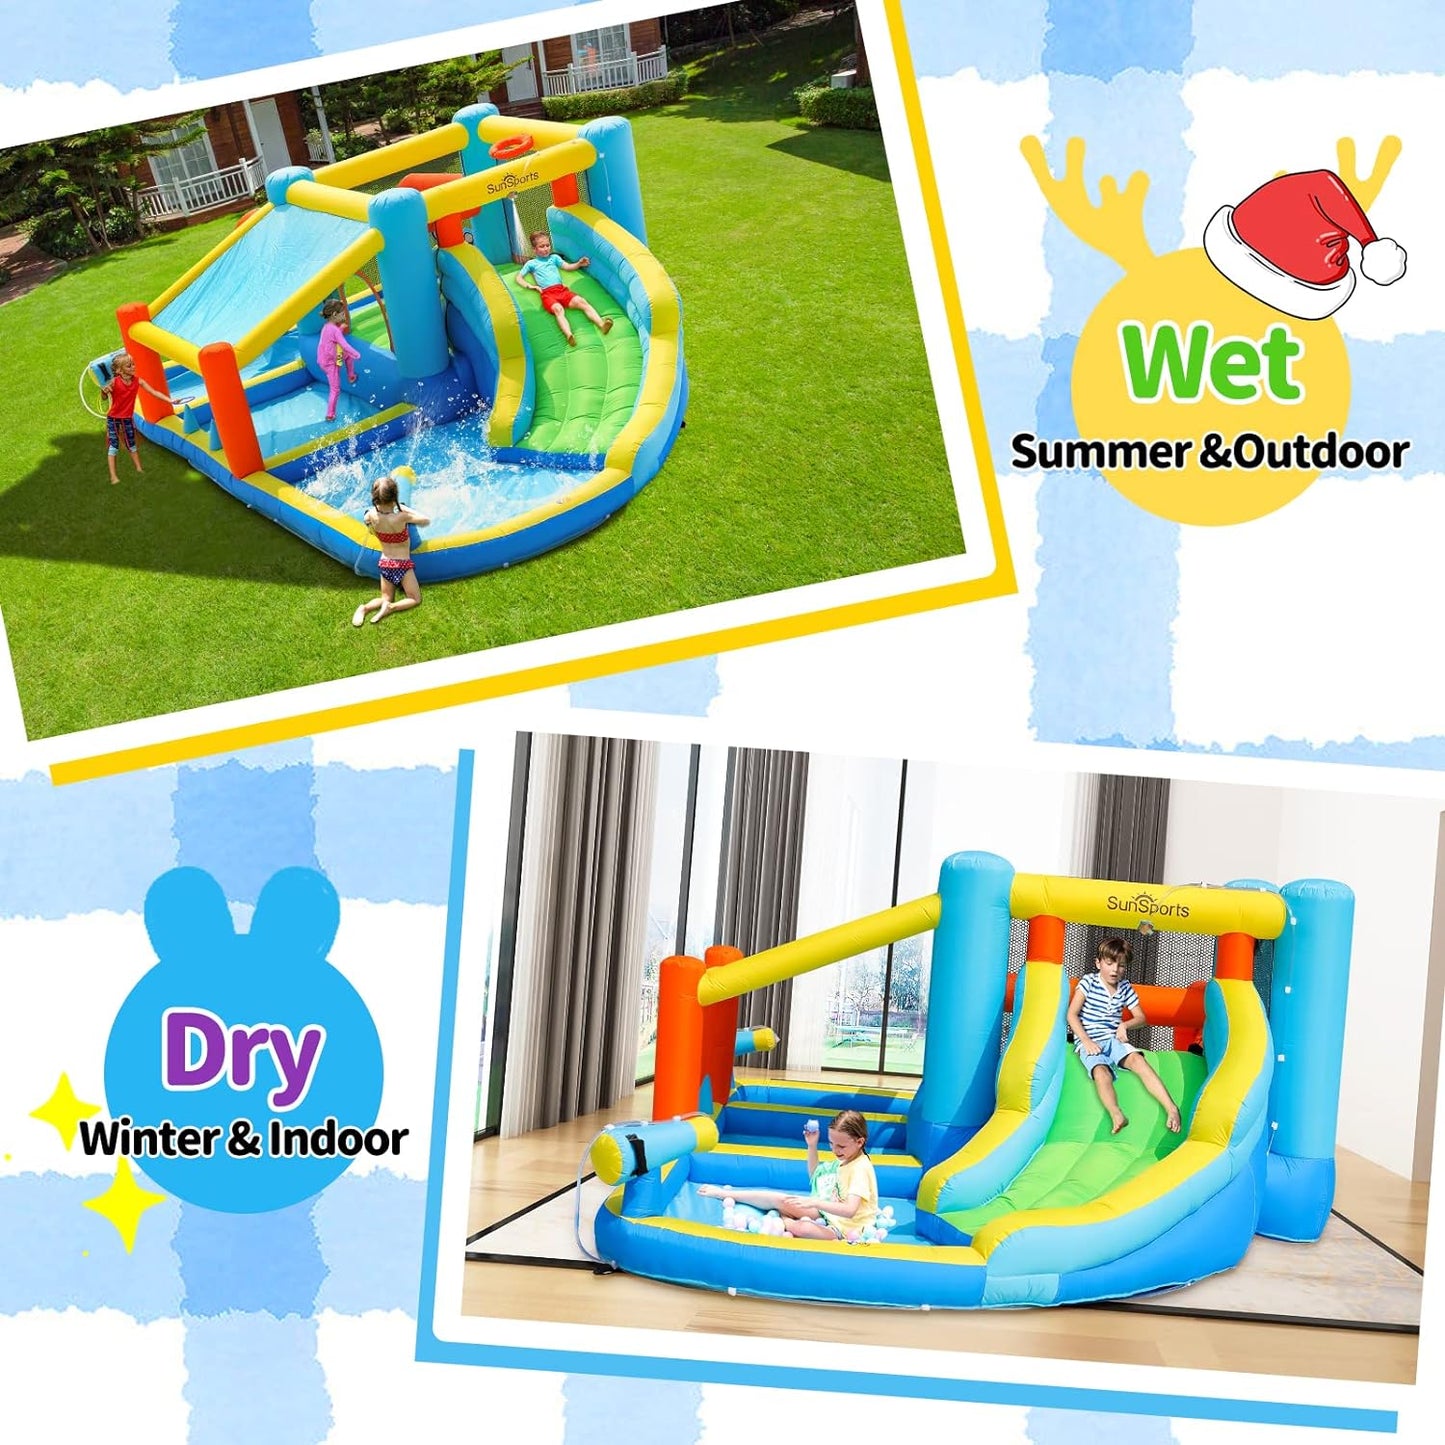 SunSports Inflatable Water Slide,Bounce House for Kids Backyard,Inflatable Water Park with Splash Pool,Jump House with Waterslide,Bouncy Castle for Wet and Dry